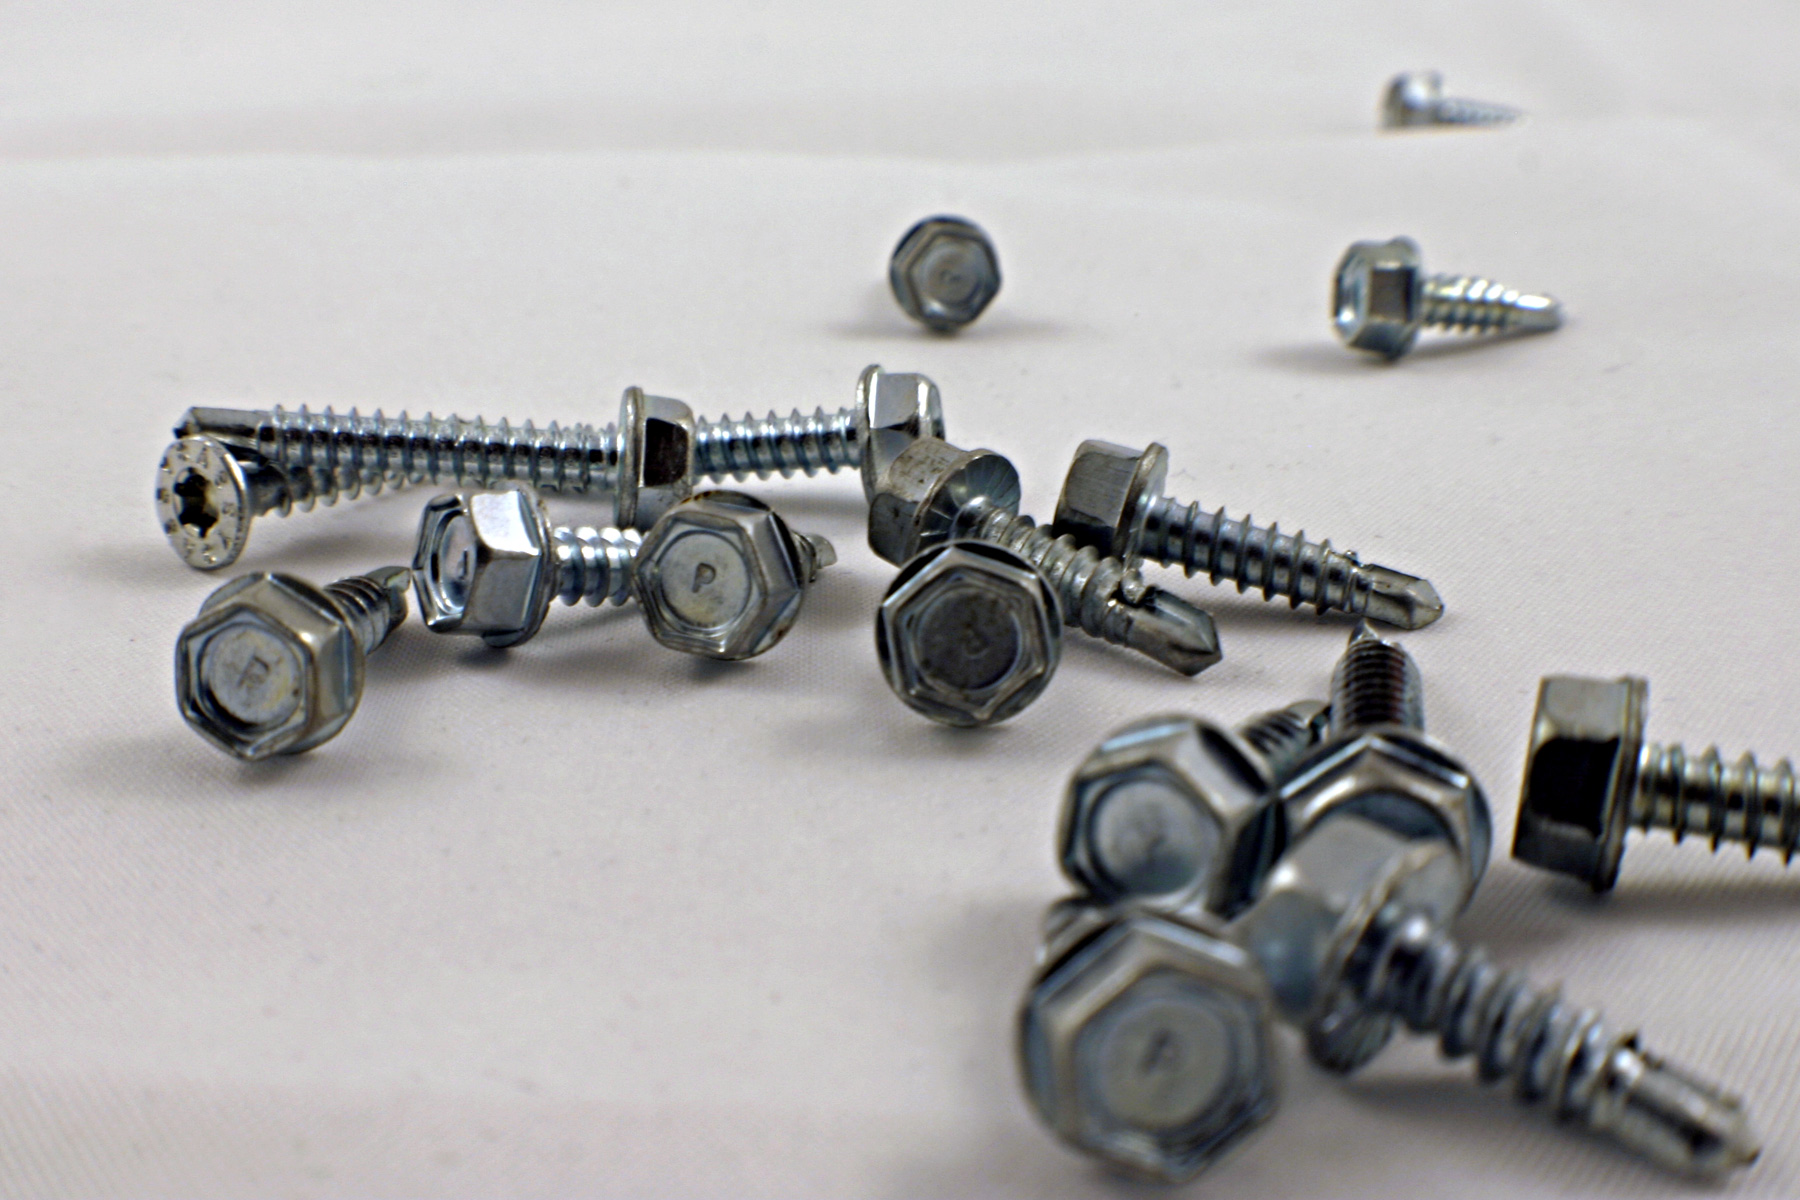 A pile of drill screws photo